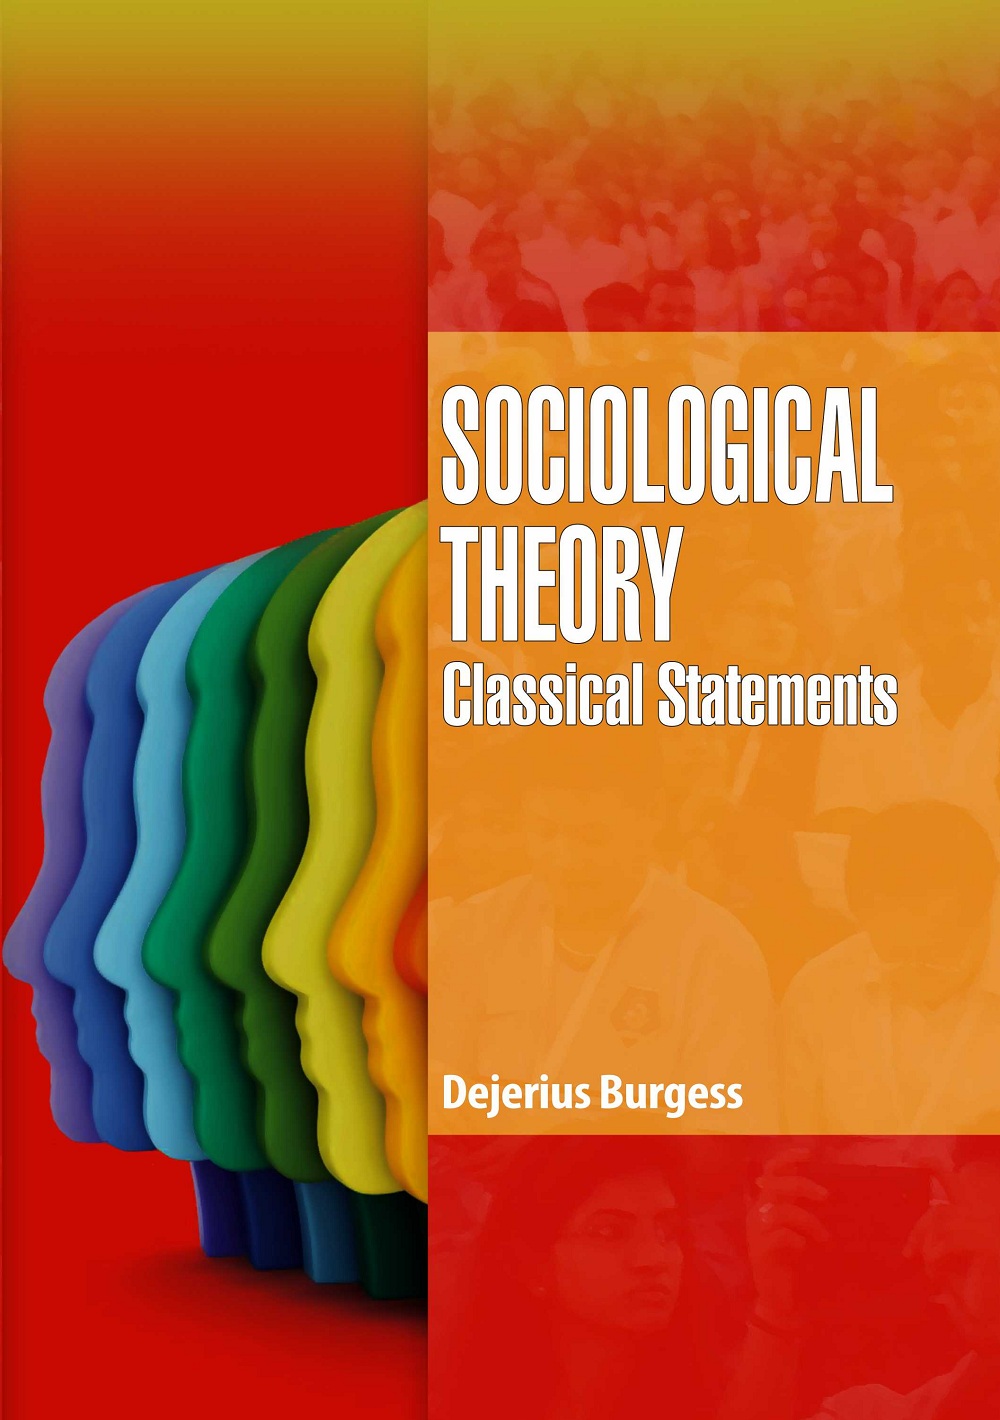 Sociological Theory- Classical Statements